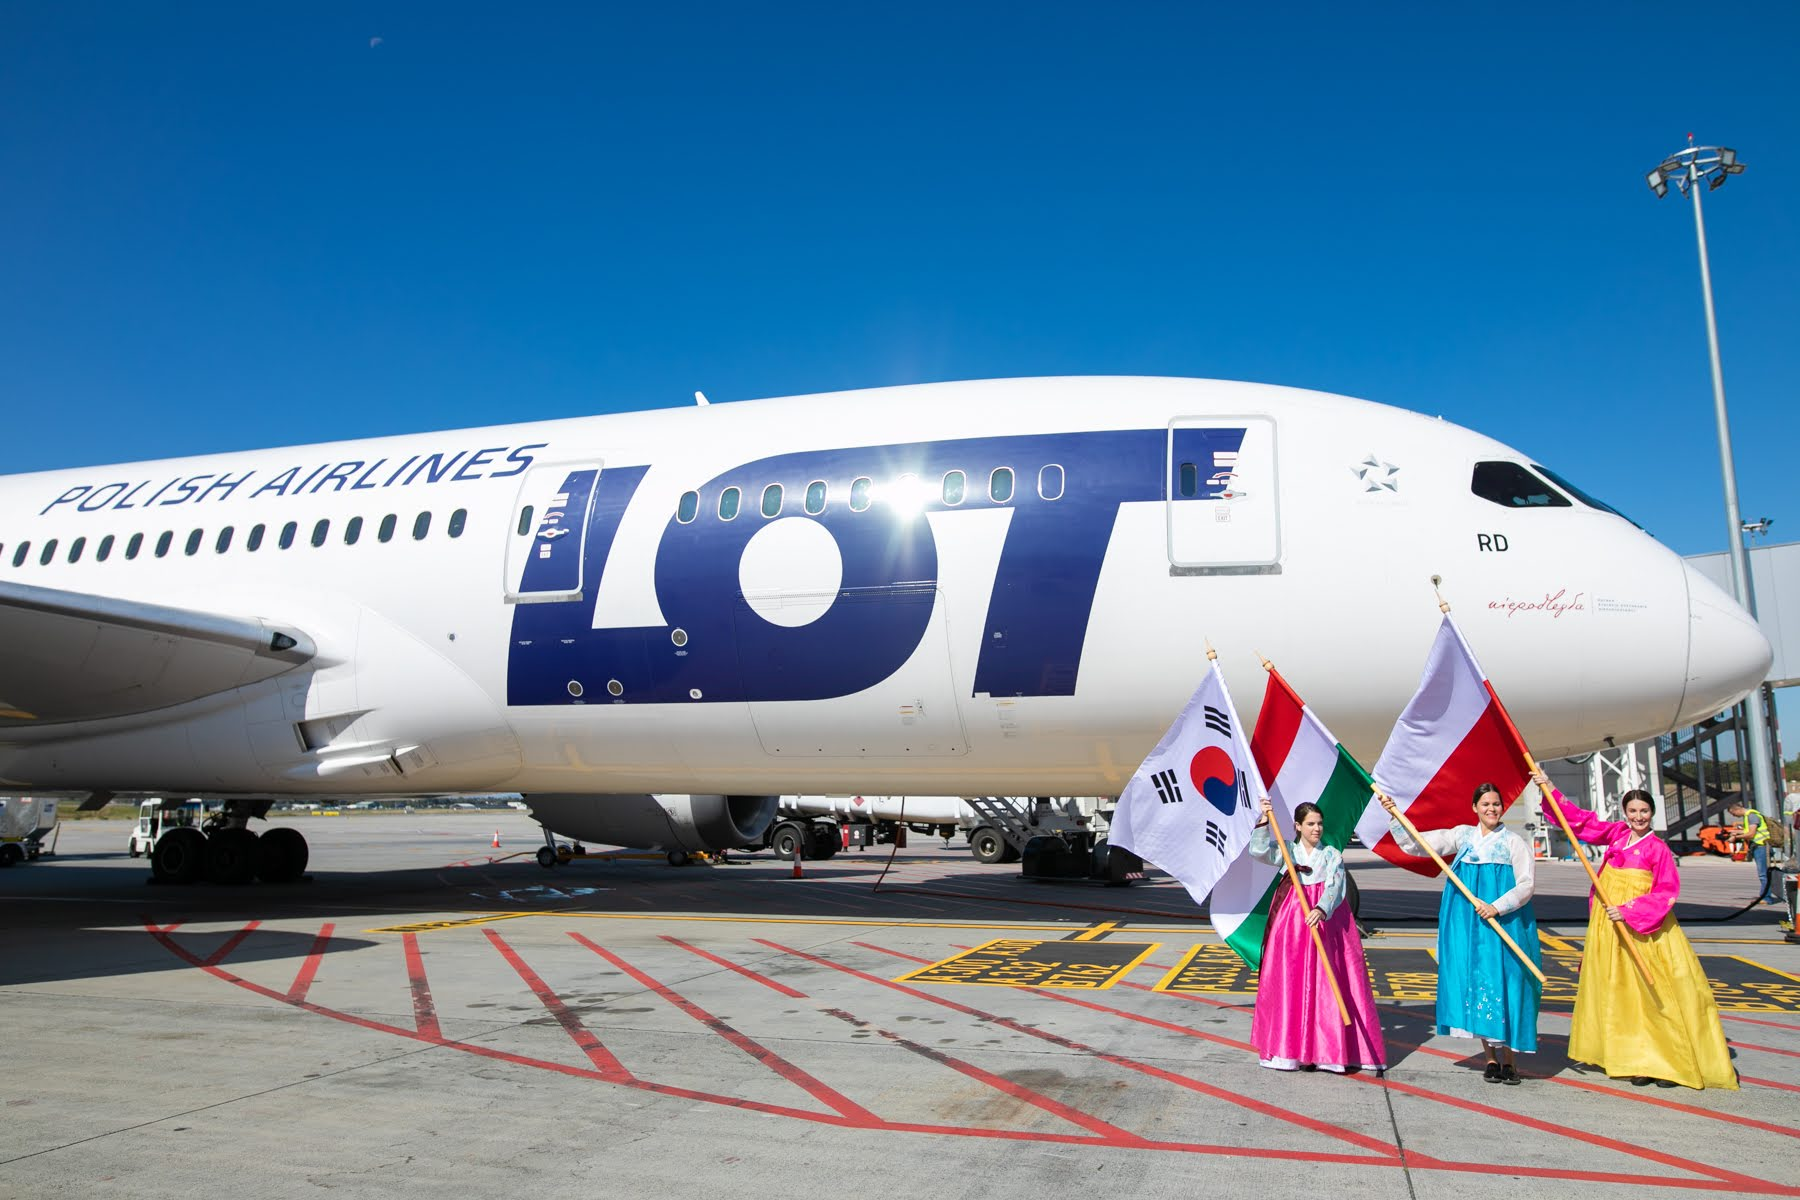 Tips for Redeeming Your Miles and Getting the Most Value From LOT's Program